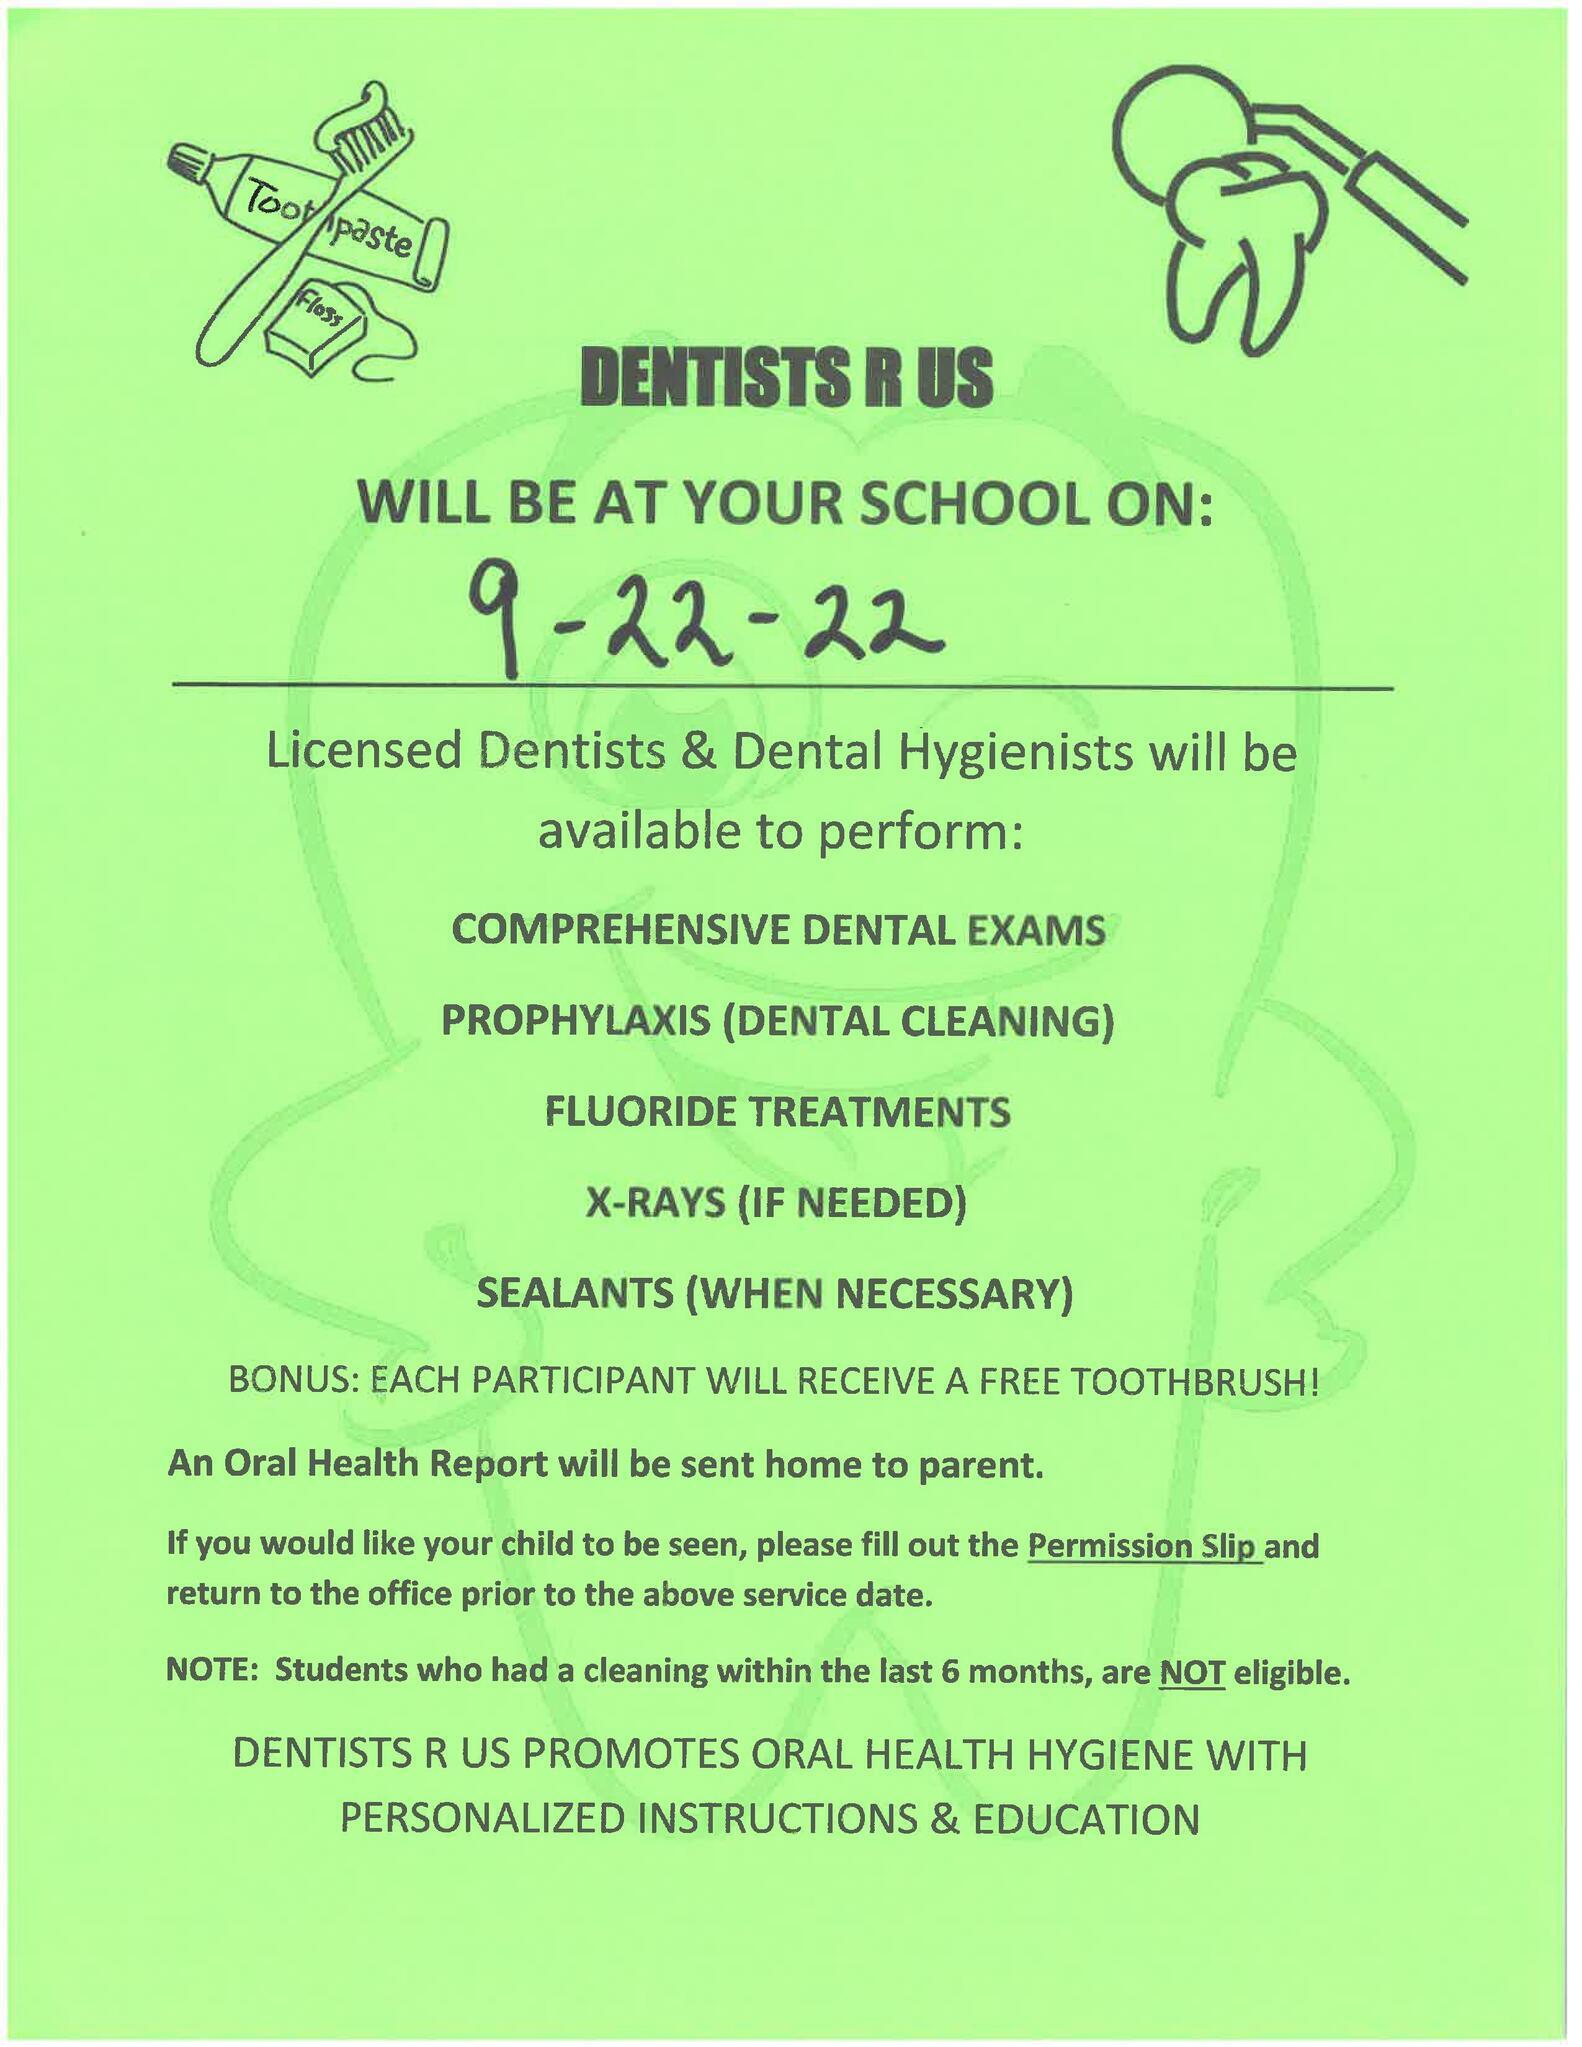 Dentists R Us will be here Spetember 22nd